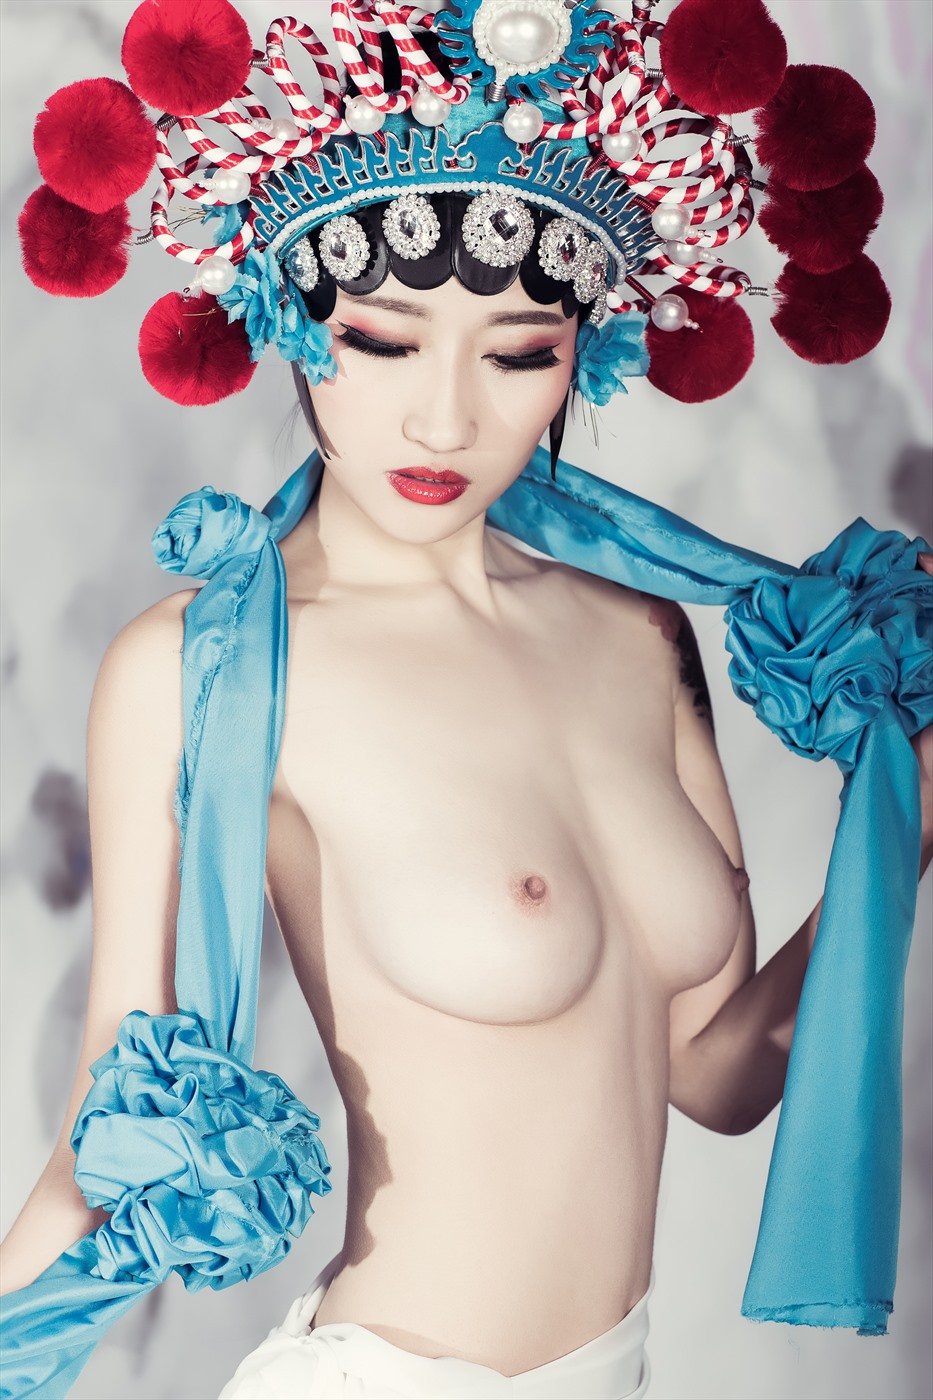 Nude-In-Ancient-Costume-018.jpg